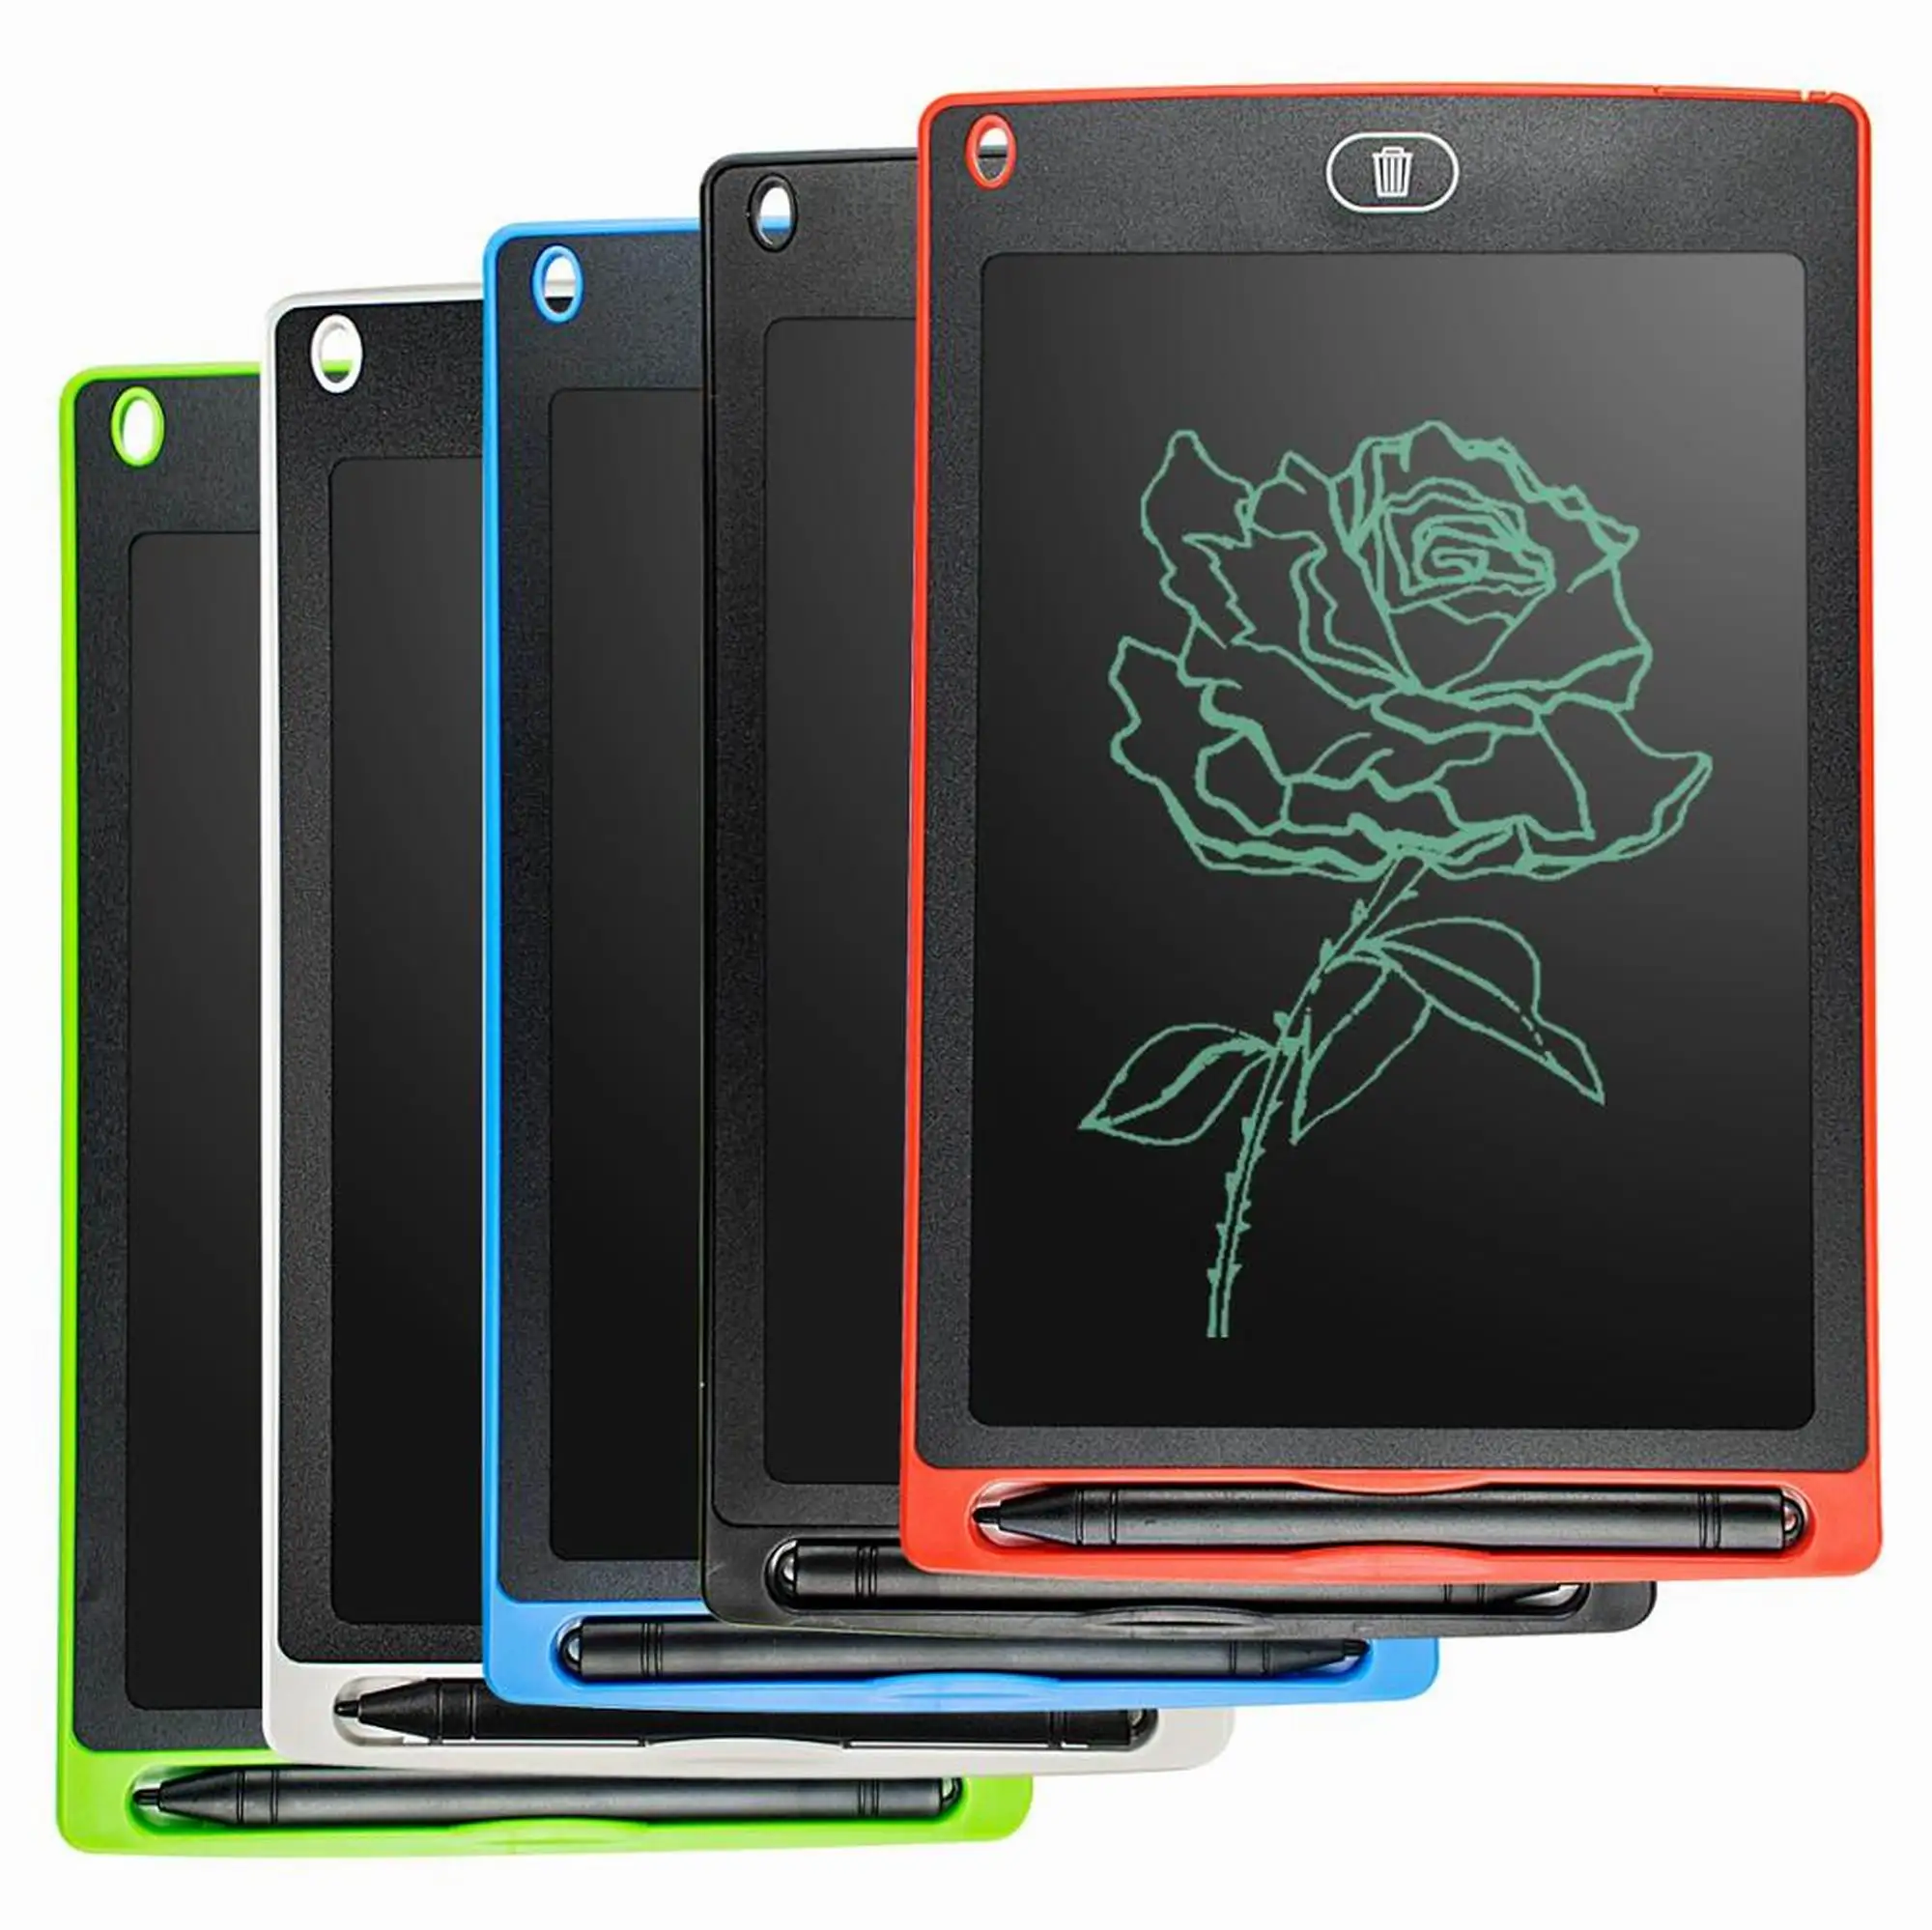 8.5 Inch LCD Writing Tablet Electronic Drawing Doodle Board Digital Handwriting Paperless Notepad For Kids And Adult Protect Eye